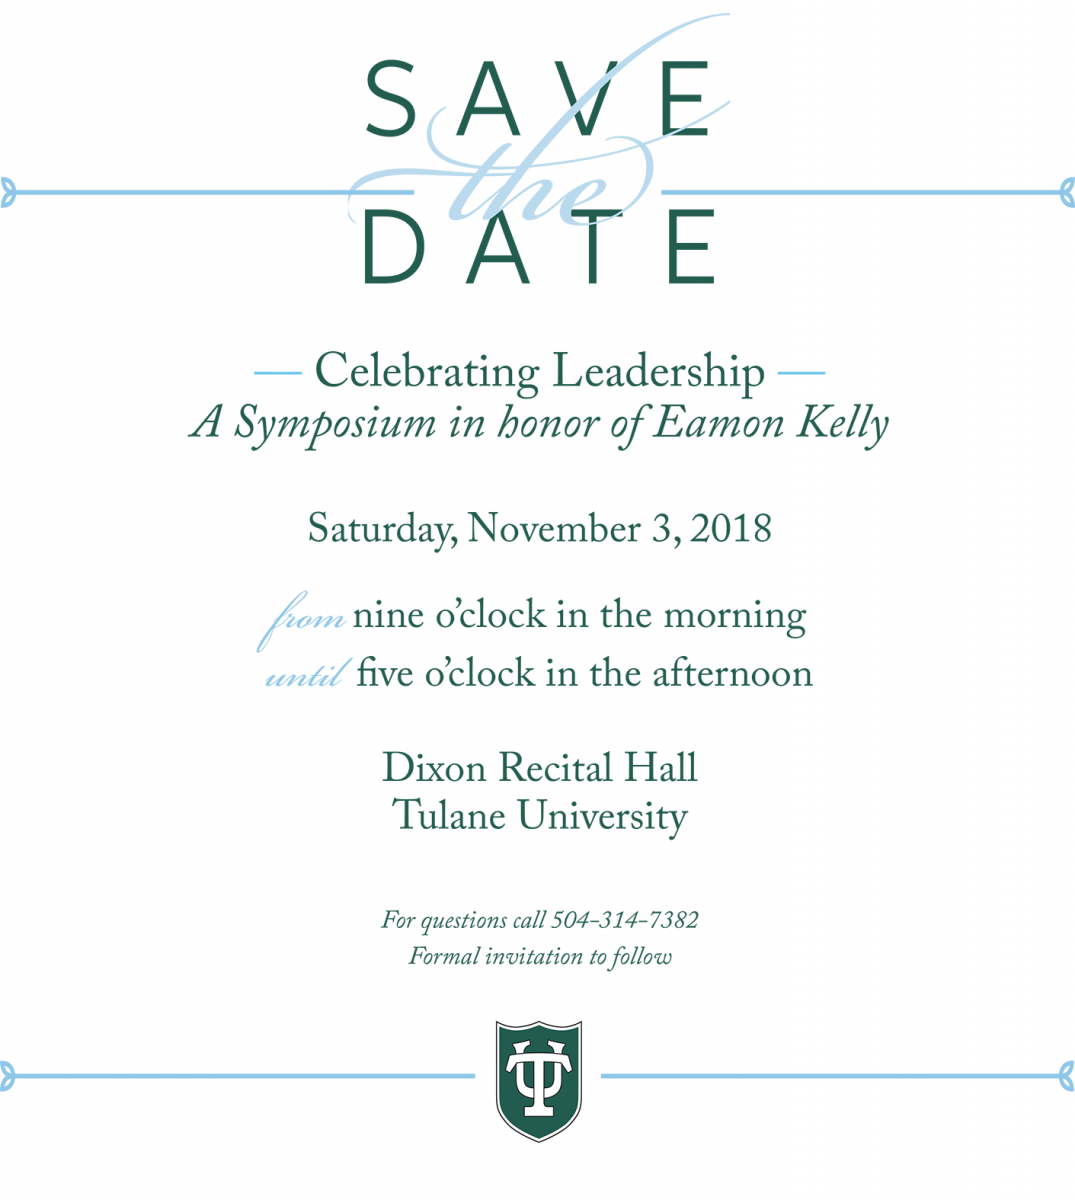 Image of the Save the Date for the event